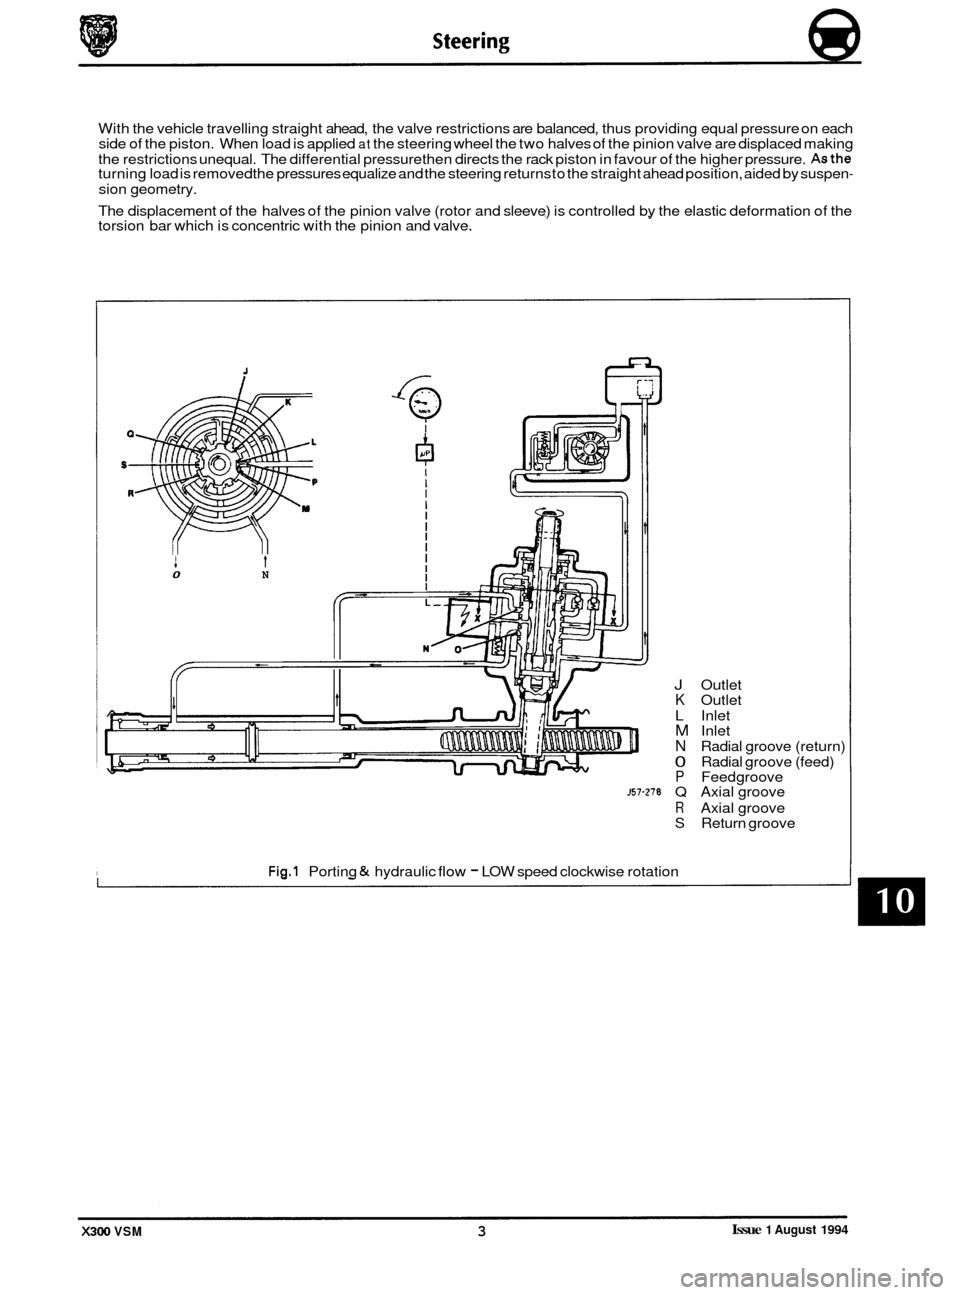 JAGUAR XJ6 1994 2.G Workshop Manual With the vehicle  travelling straight  ahead, the valve  restrictions  are balanced,  thus providing  equal pressure  on each 
side  of the piston.  When load is  applied at the steering  wheel the tw